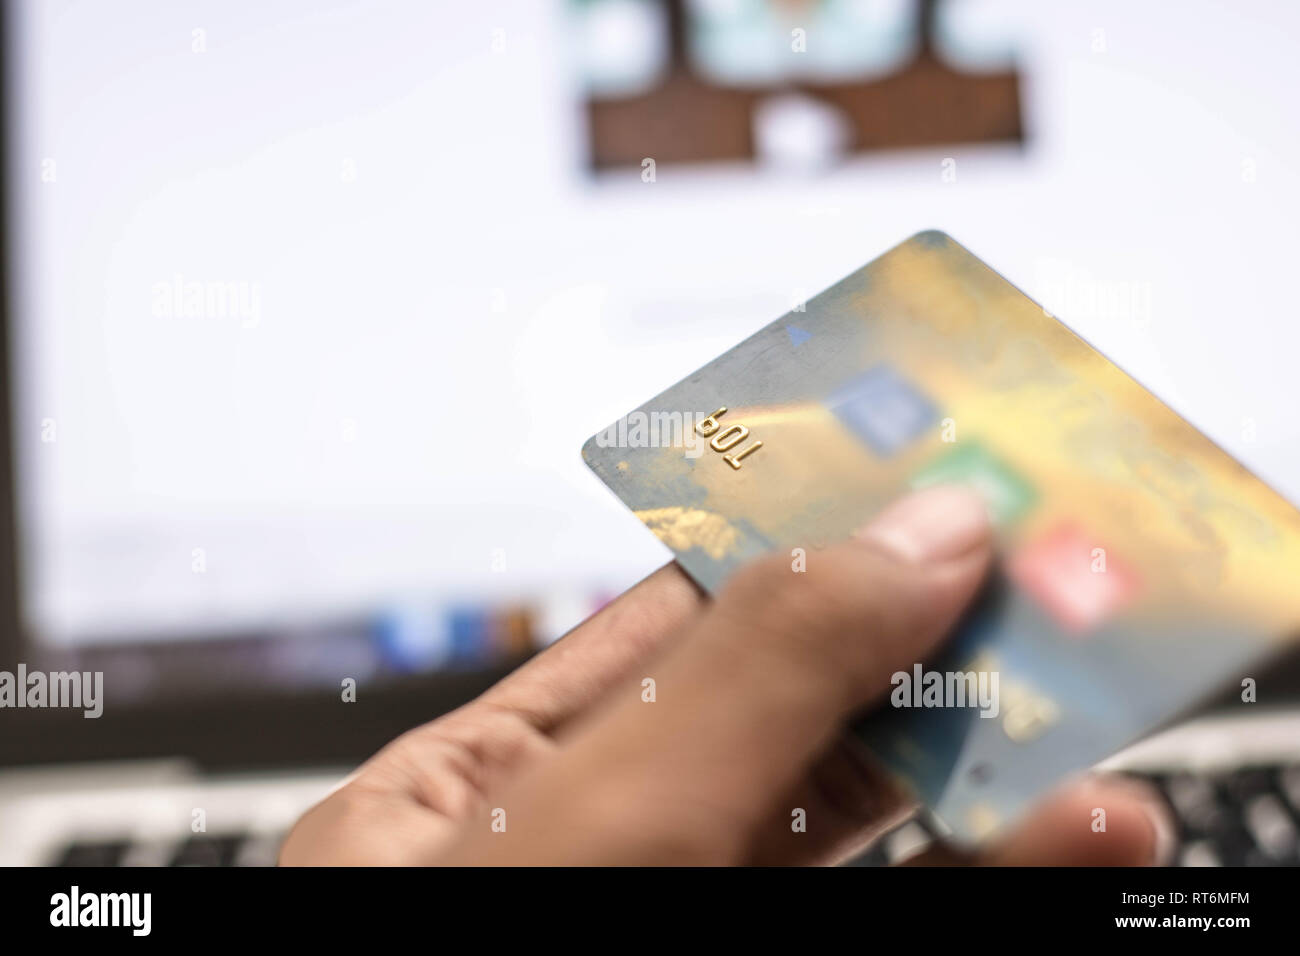 hand holding phone and internet security key and atm card with monitor showing internet transaction as background Stock Photo